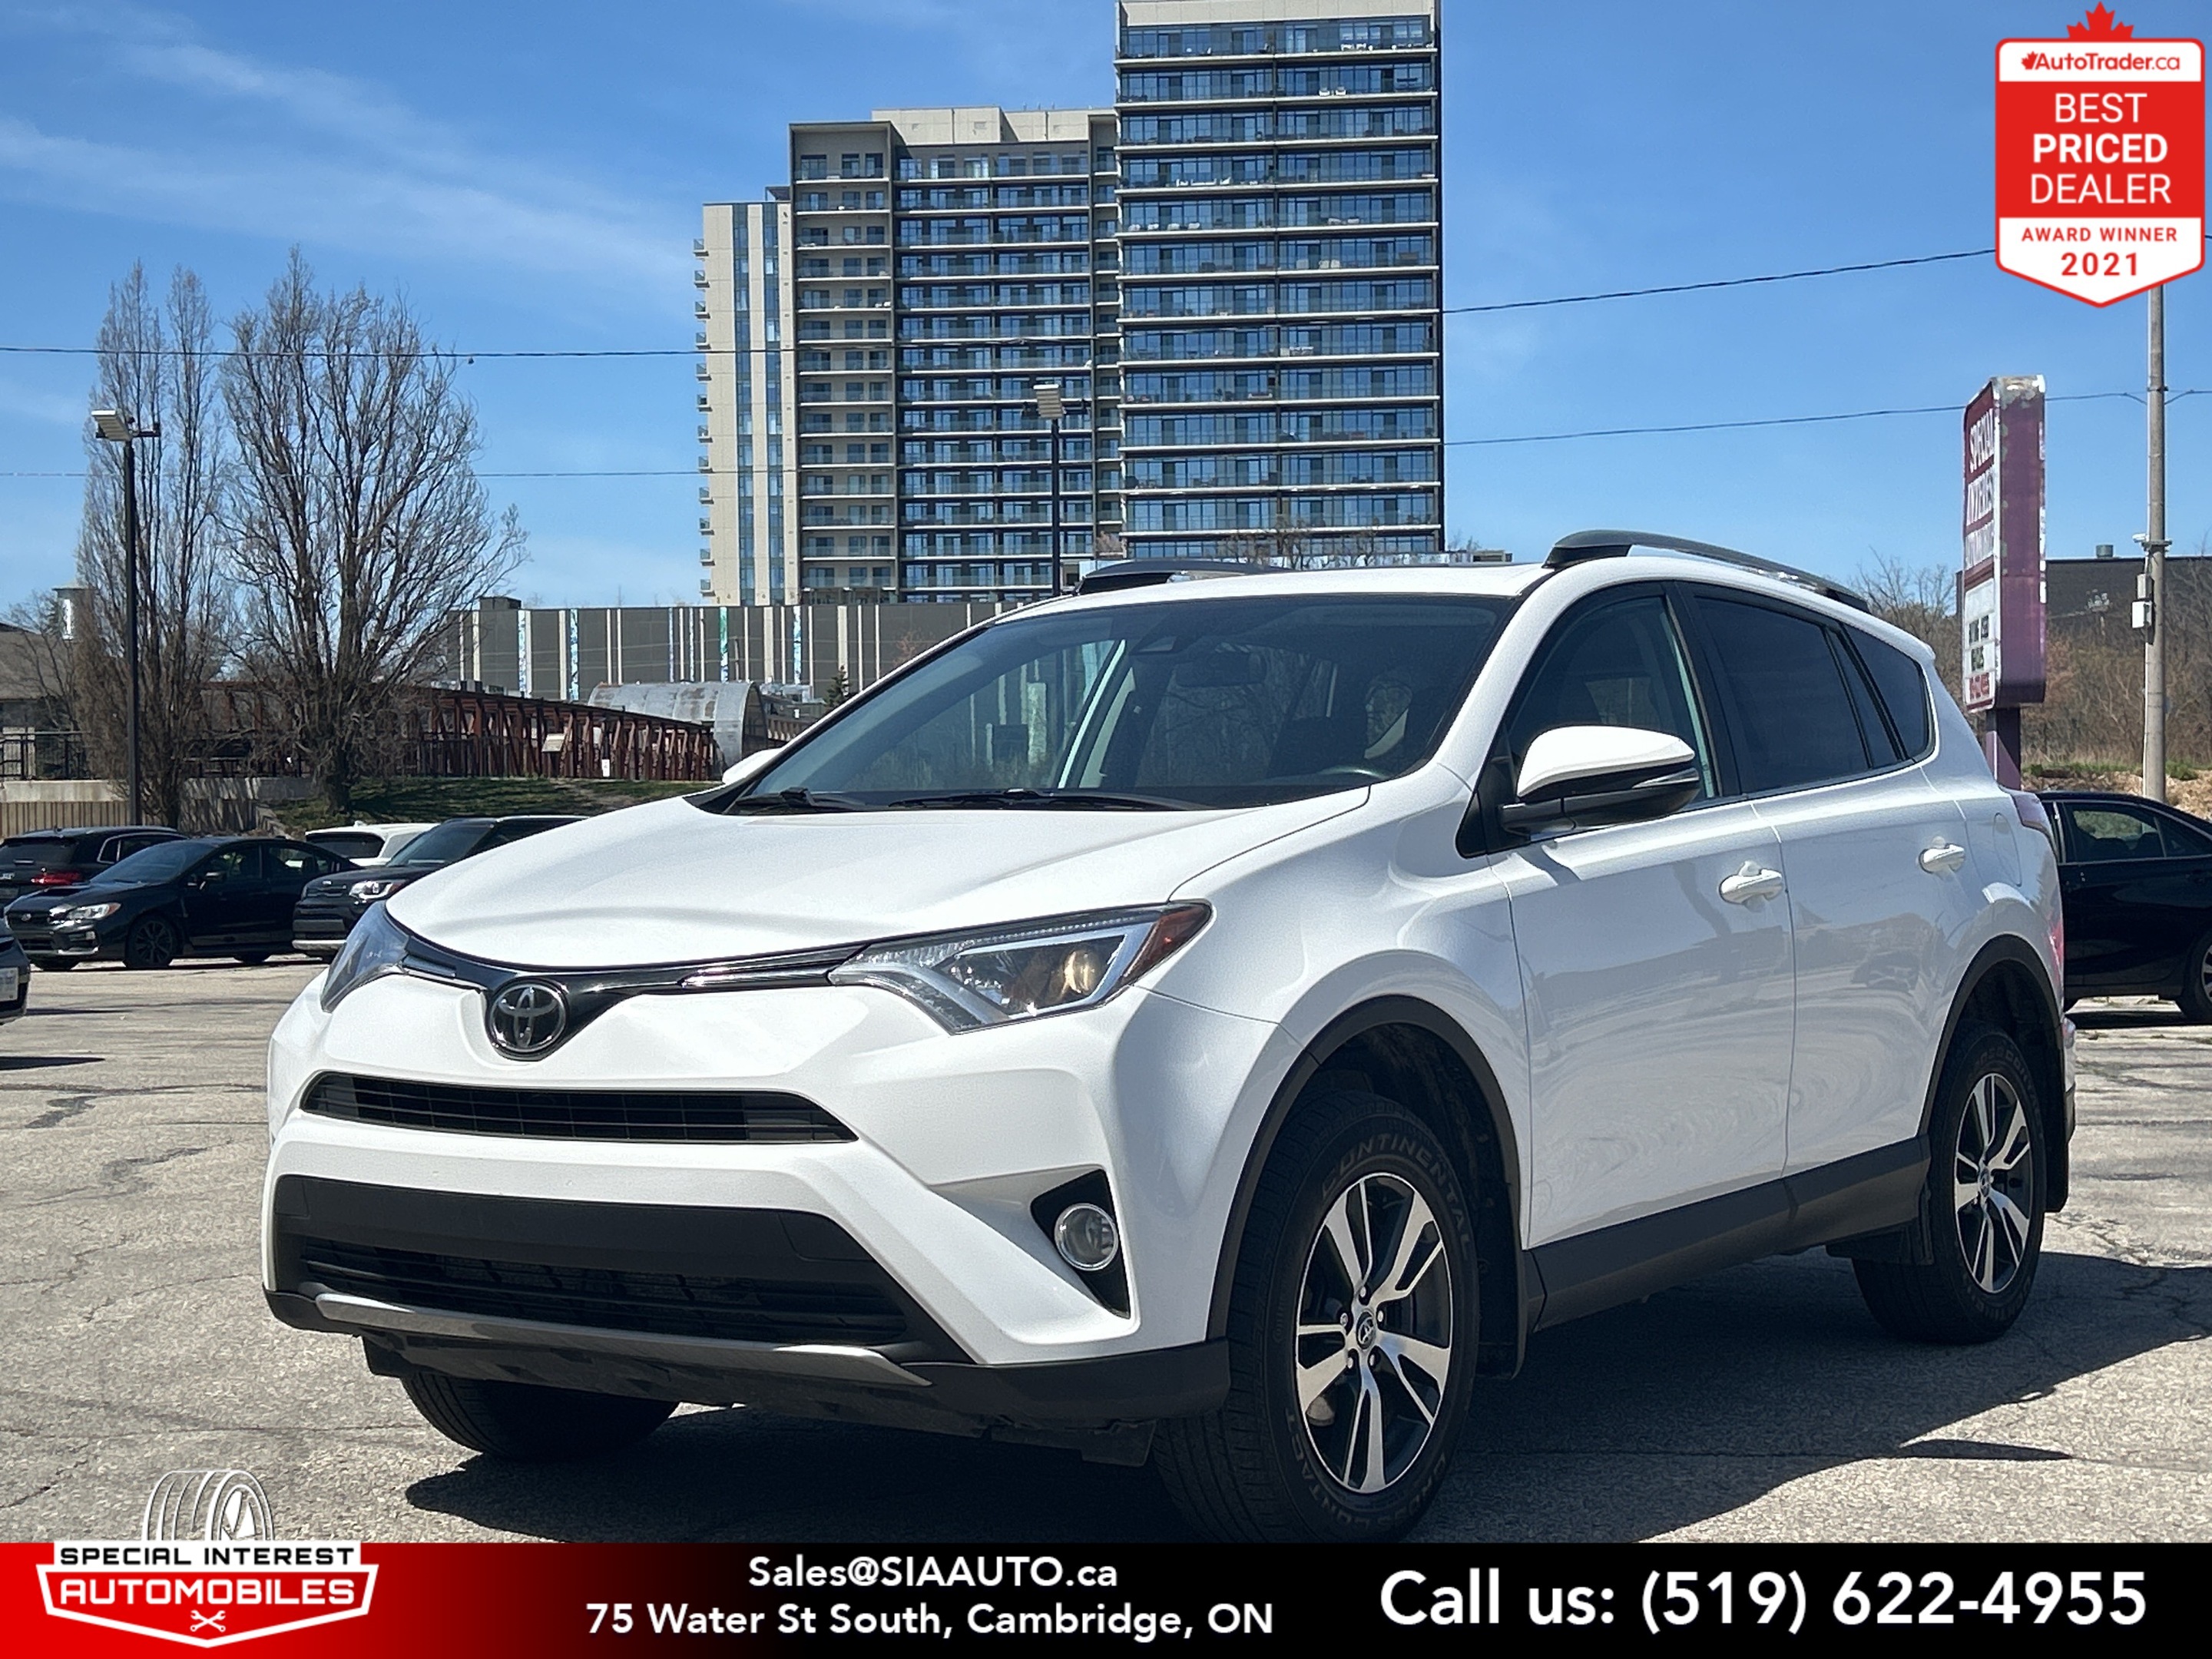 2018 Toyota RAV4 AWD XLE * Accident Free * One Owner * Certified